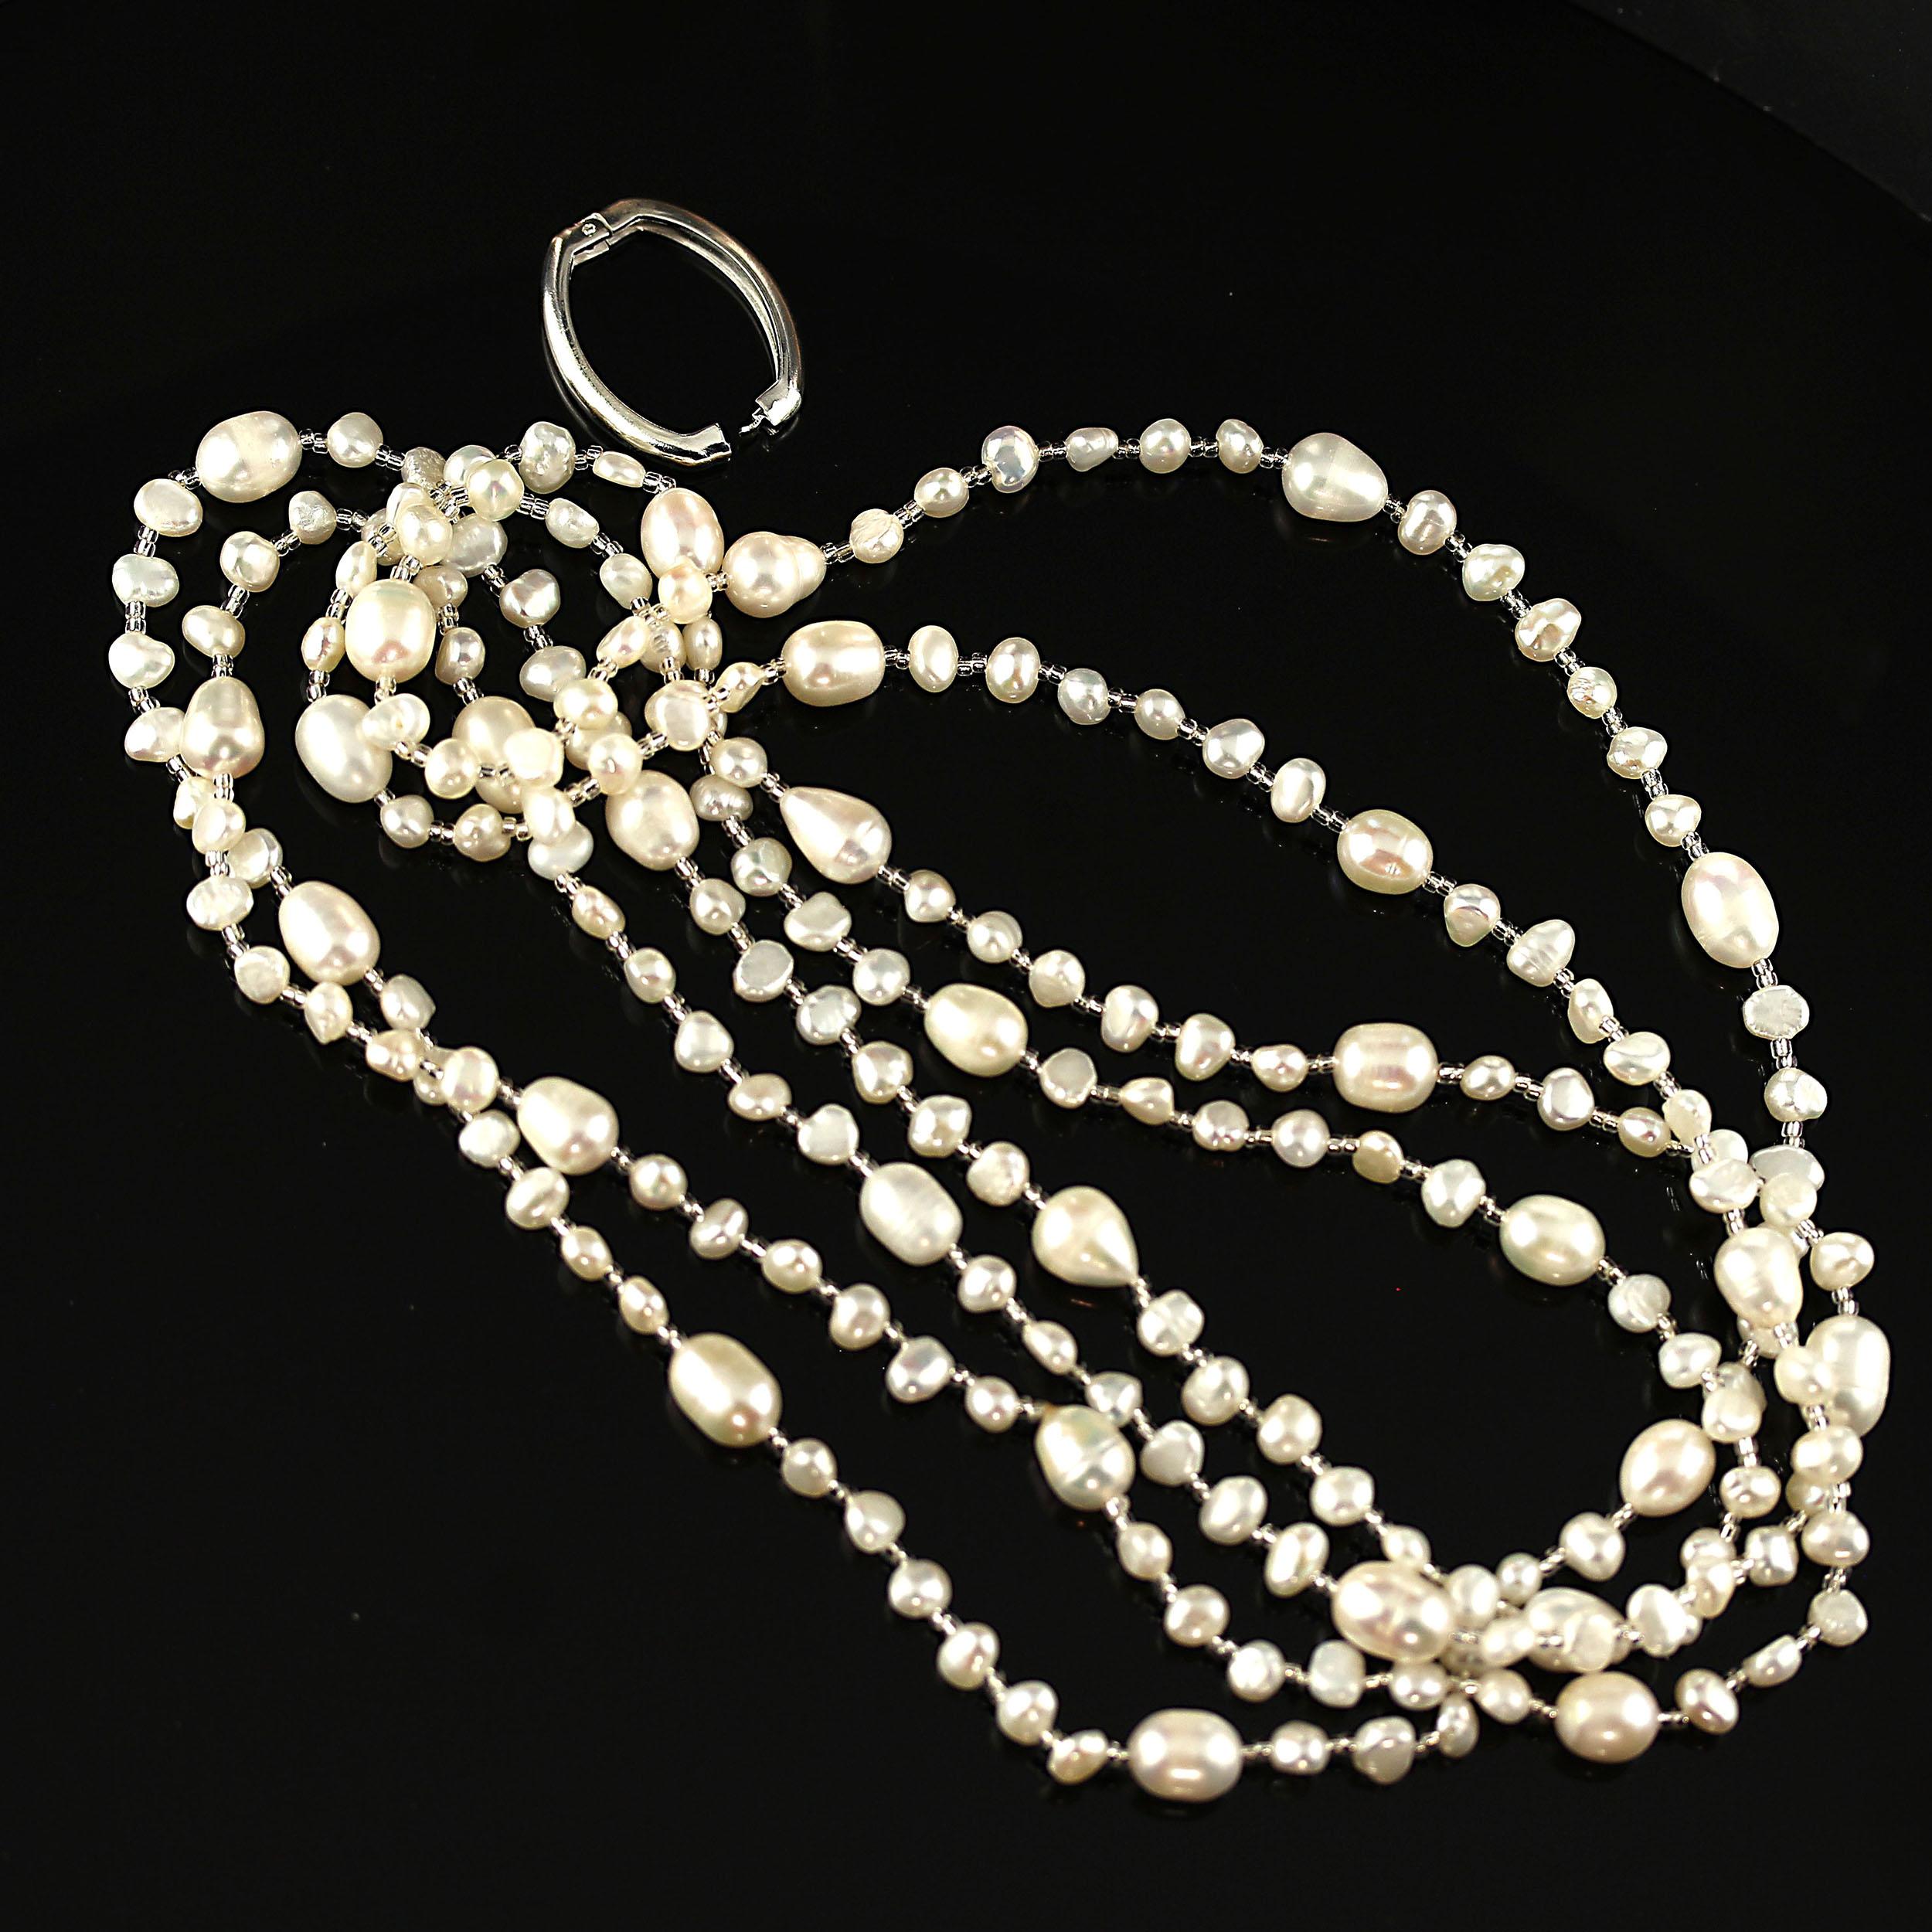 Women's or Men's Continuous Strand Freshwater Pearl Necklace